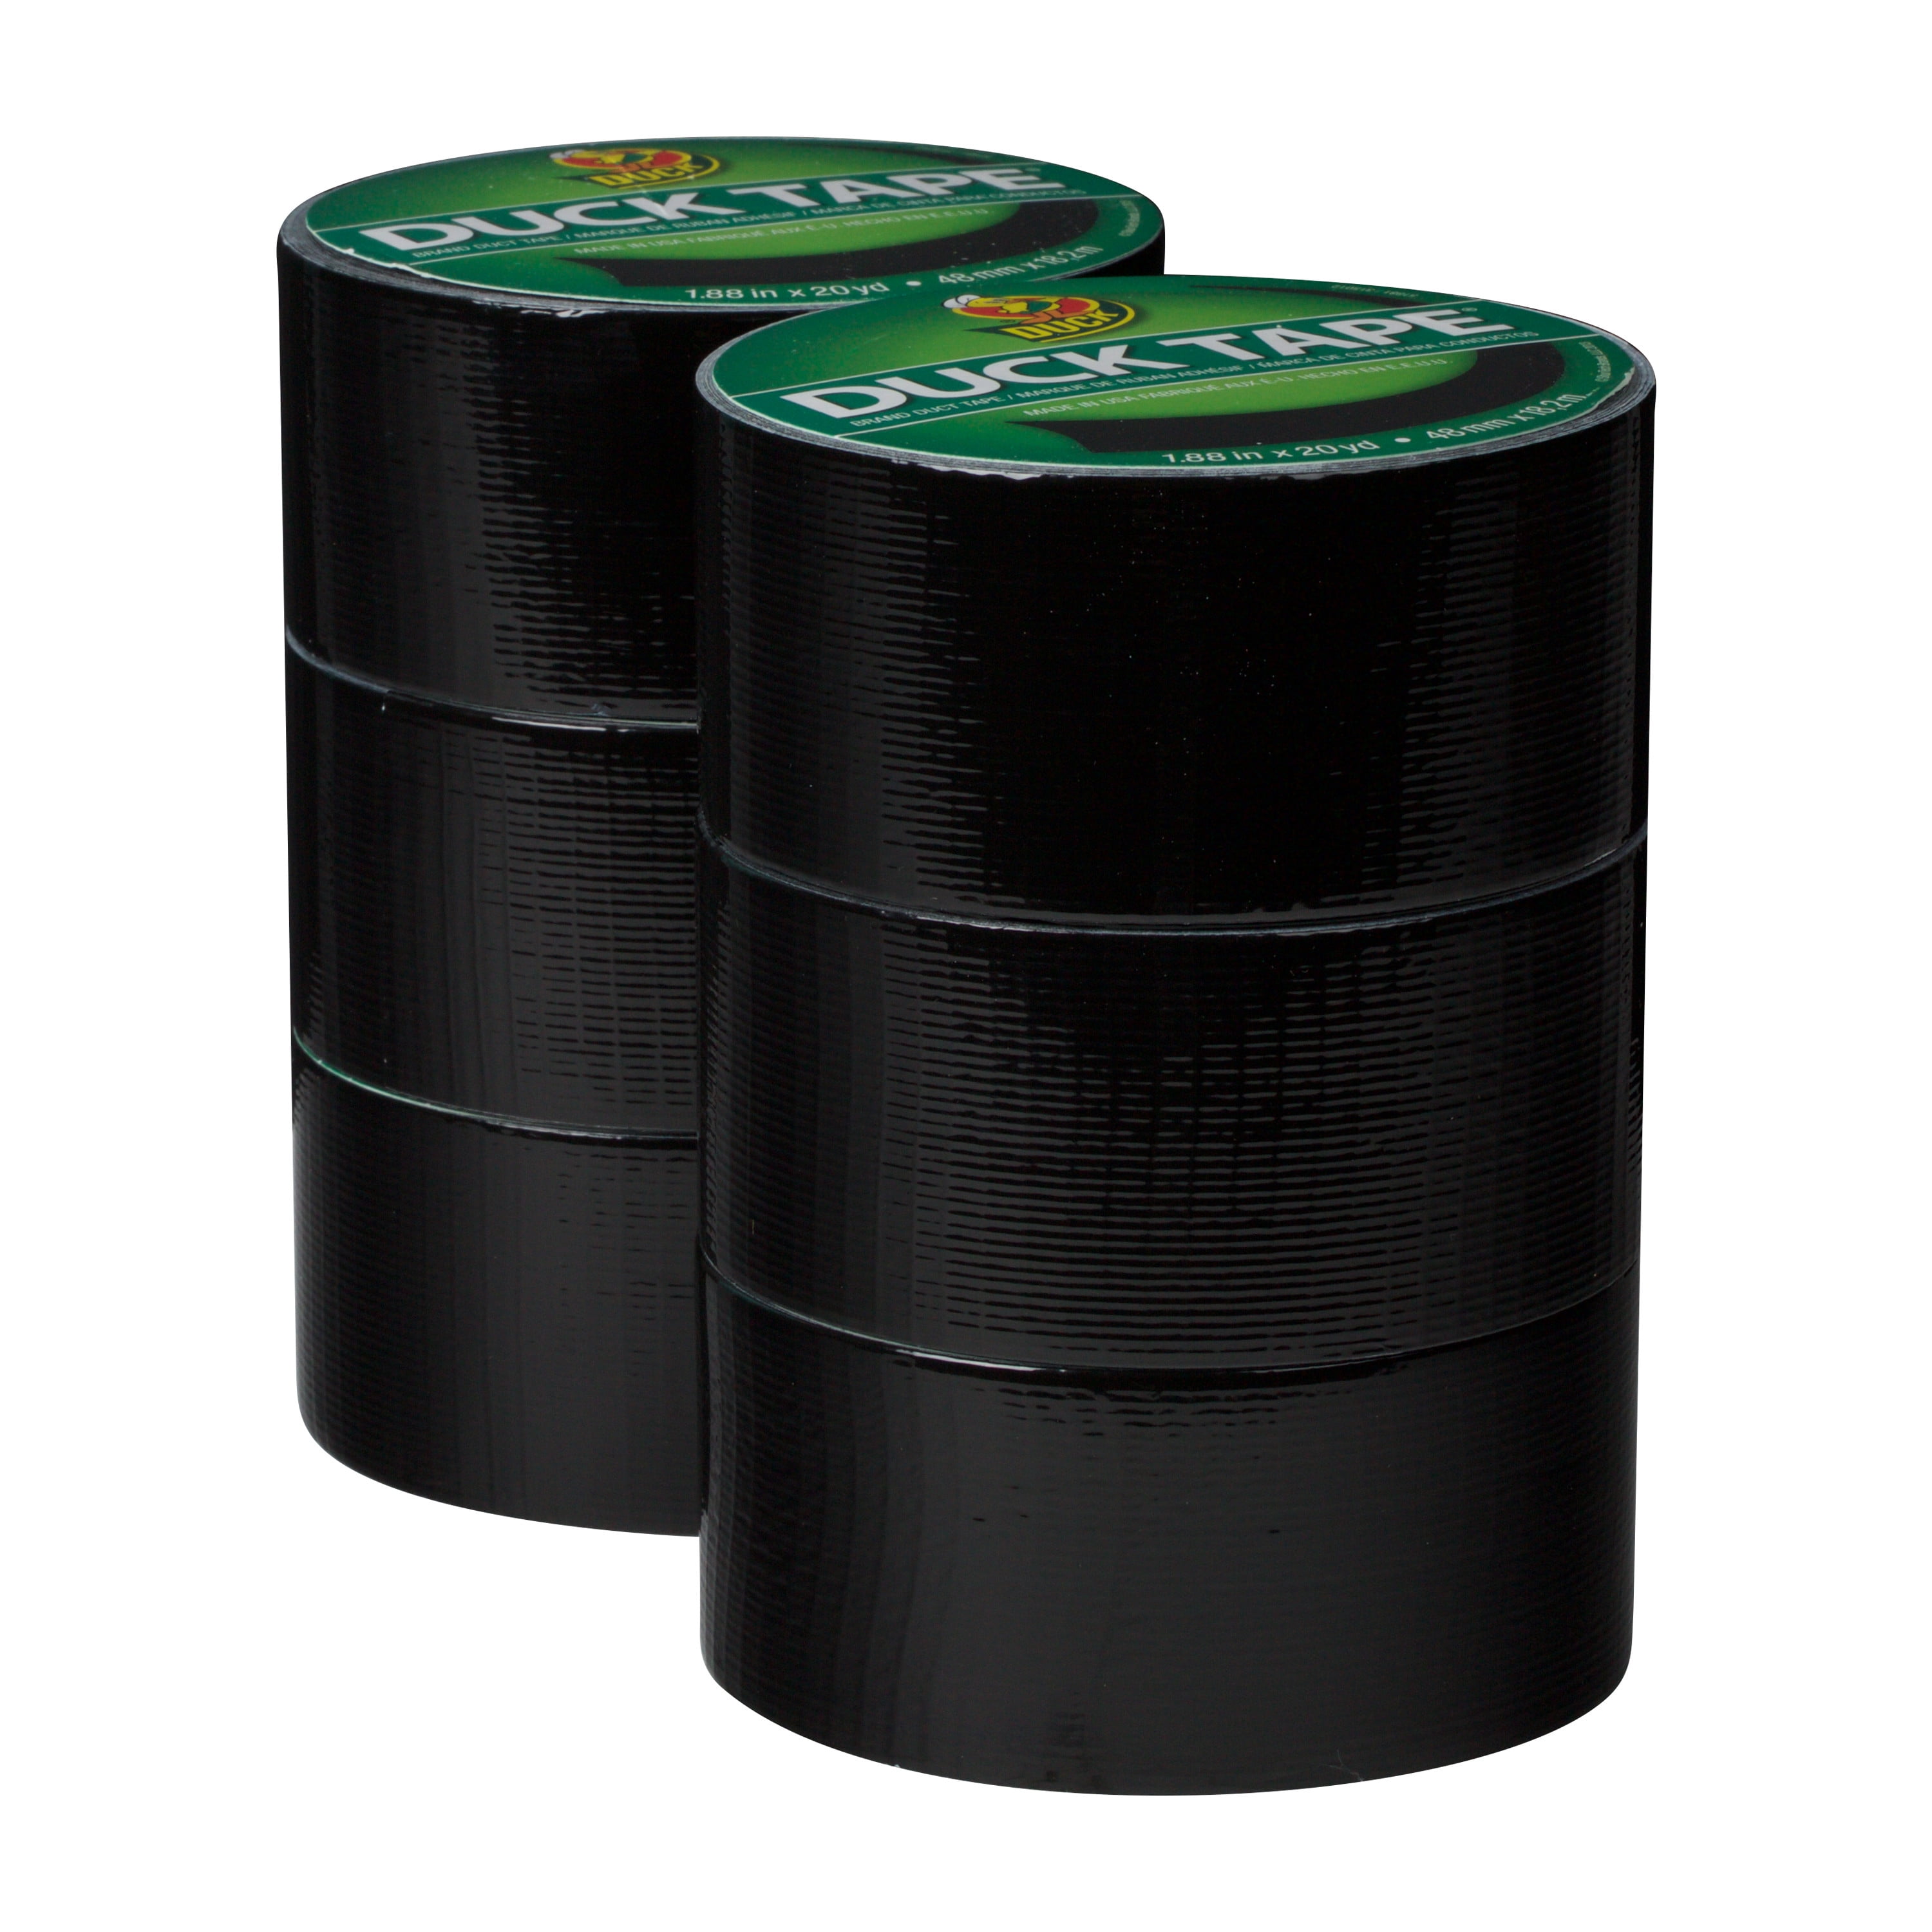 Duck Brand 1.88 in x 20 yd Black Colored Duct Tape, 6-Pack, Size: 1.88 x 20 Yards